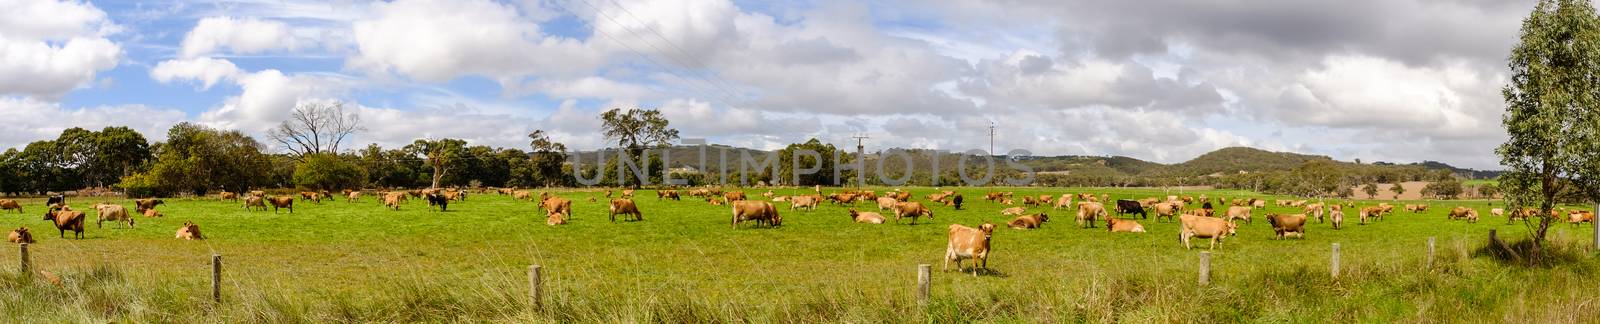 Cows grazing in a beautiful green meadow by travellens